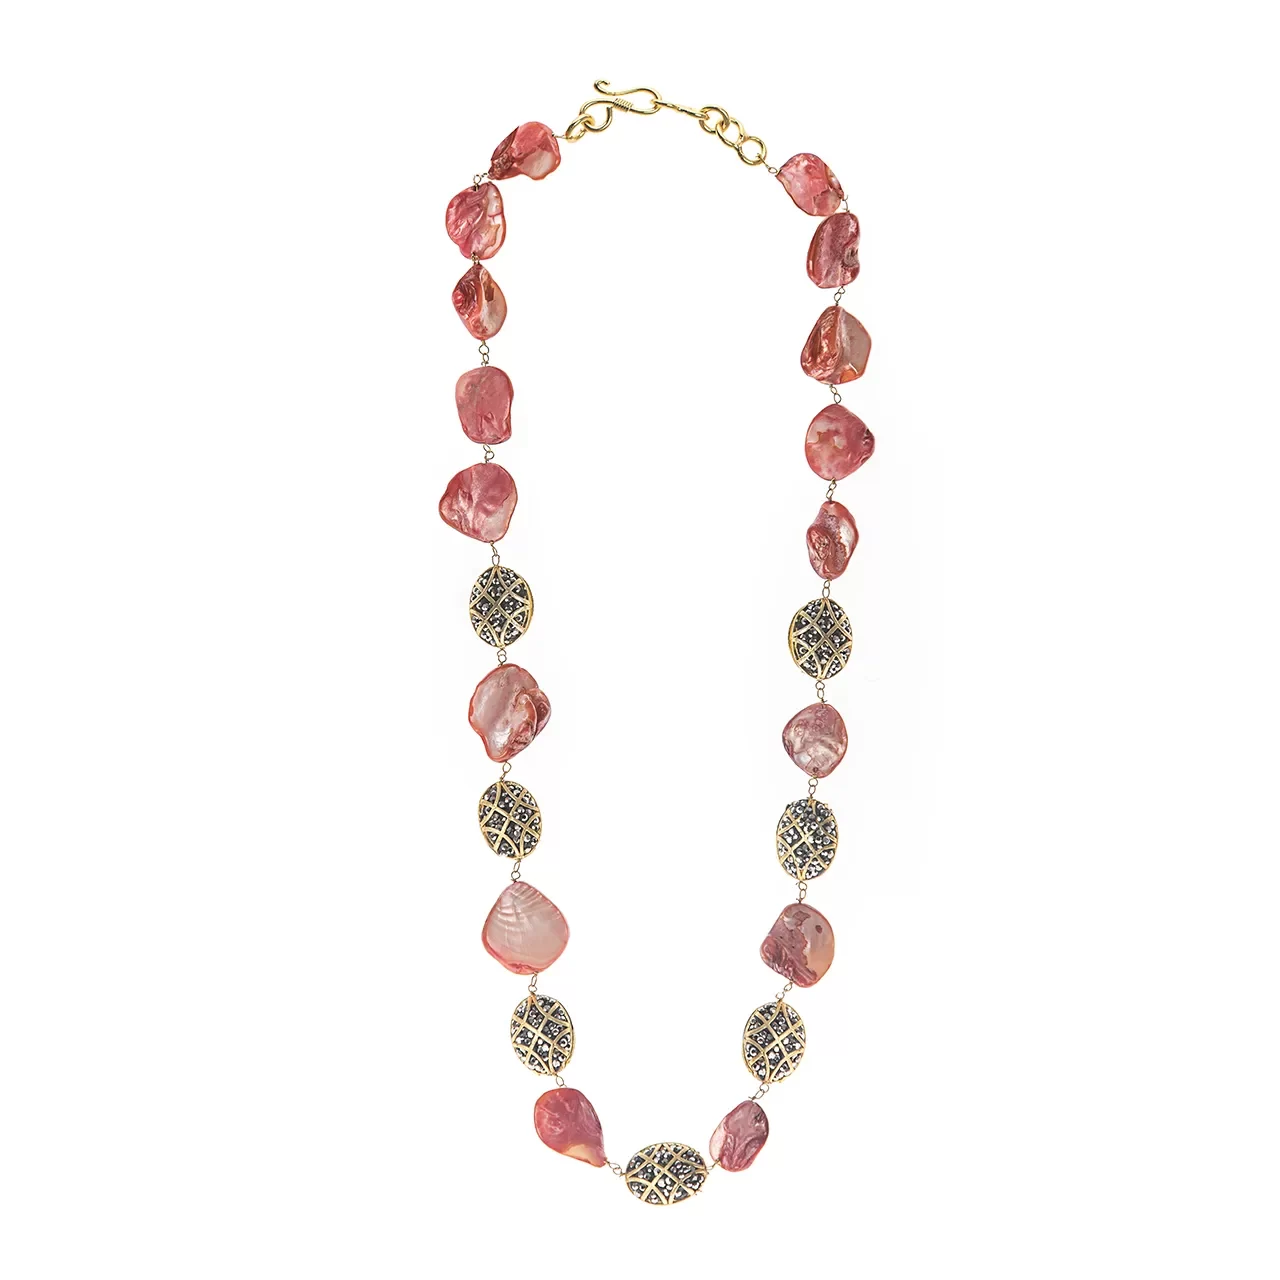 a front view of a necklace with pink opal gemstones and black stones with a gold chain